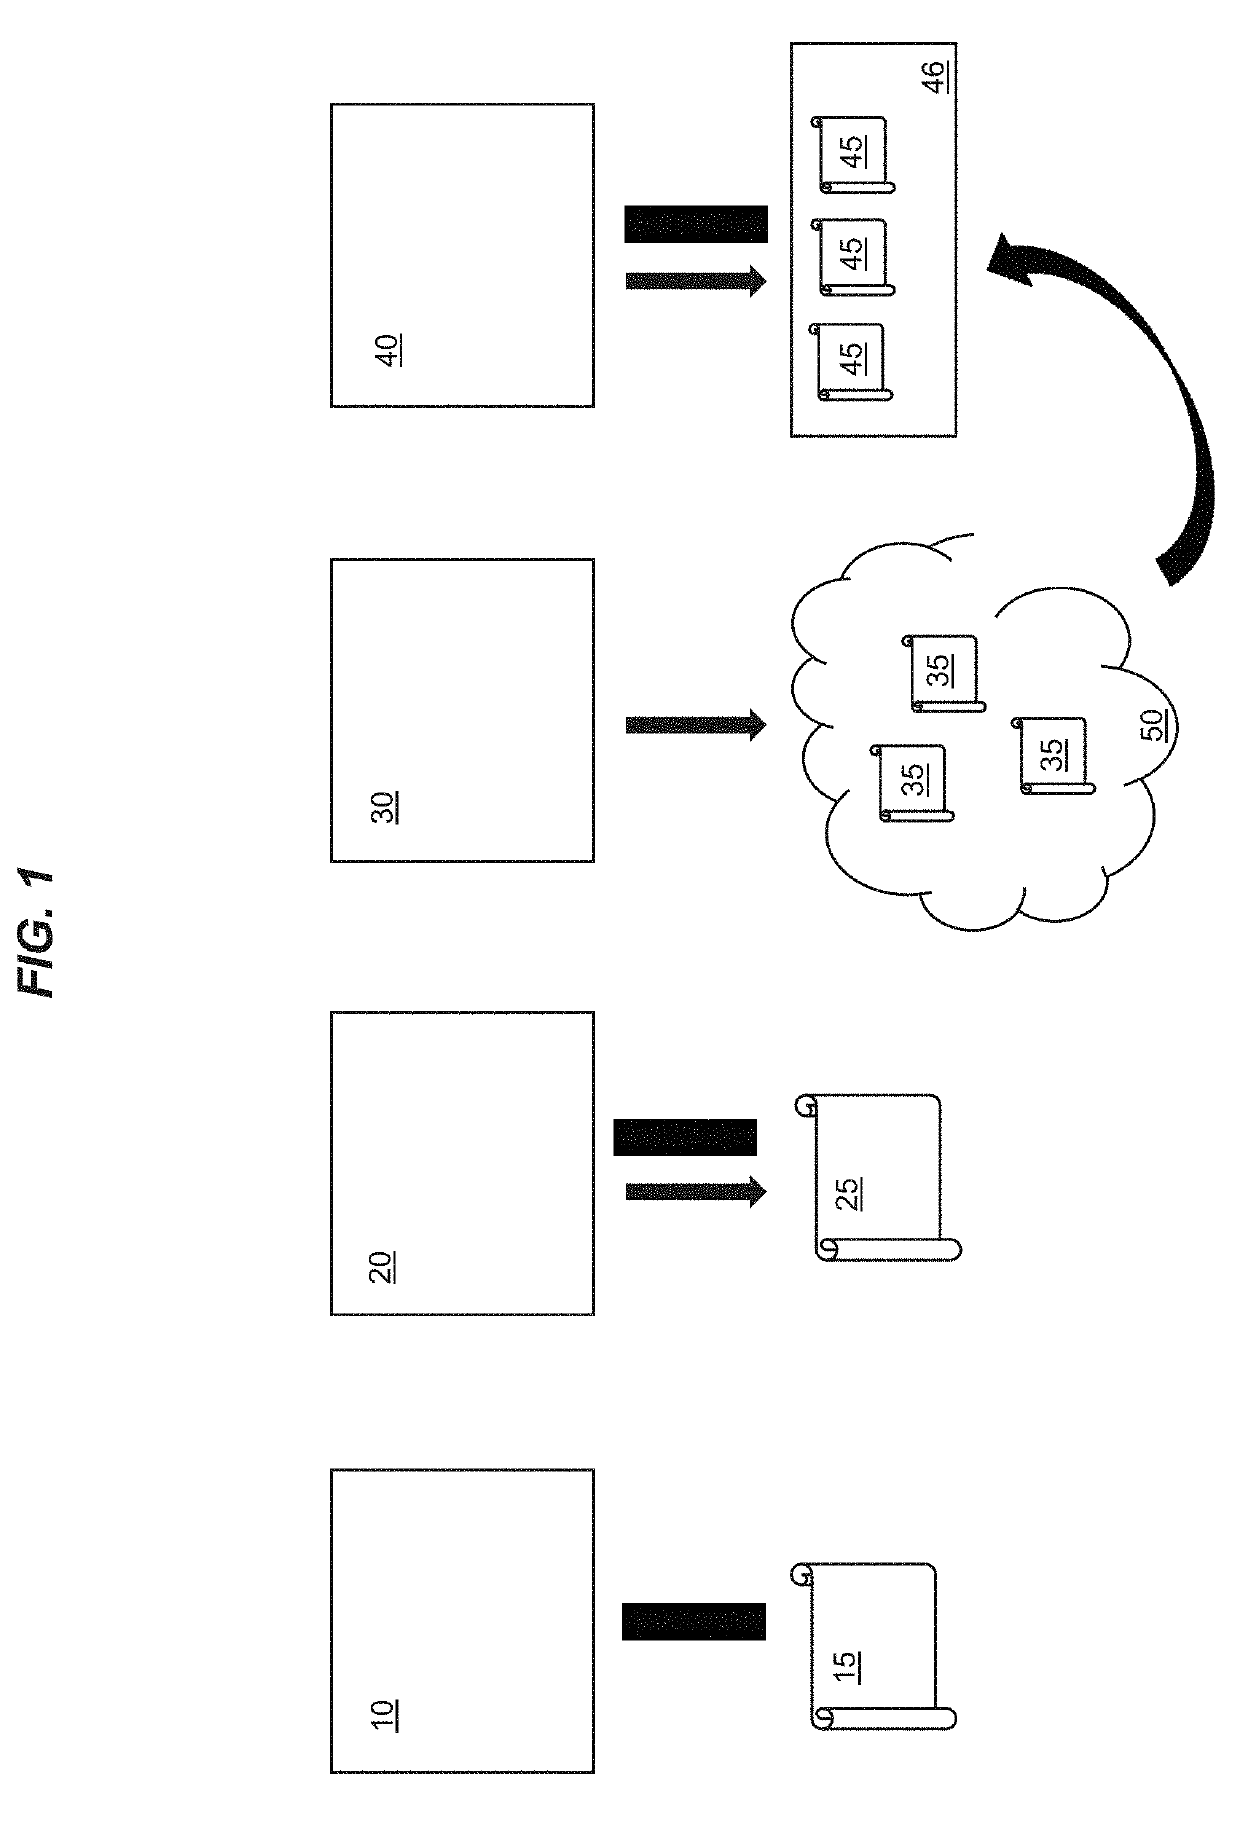 Manipulation of non-linearly connected transmedia content data